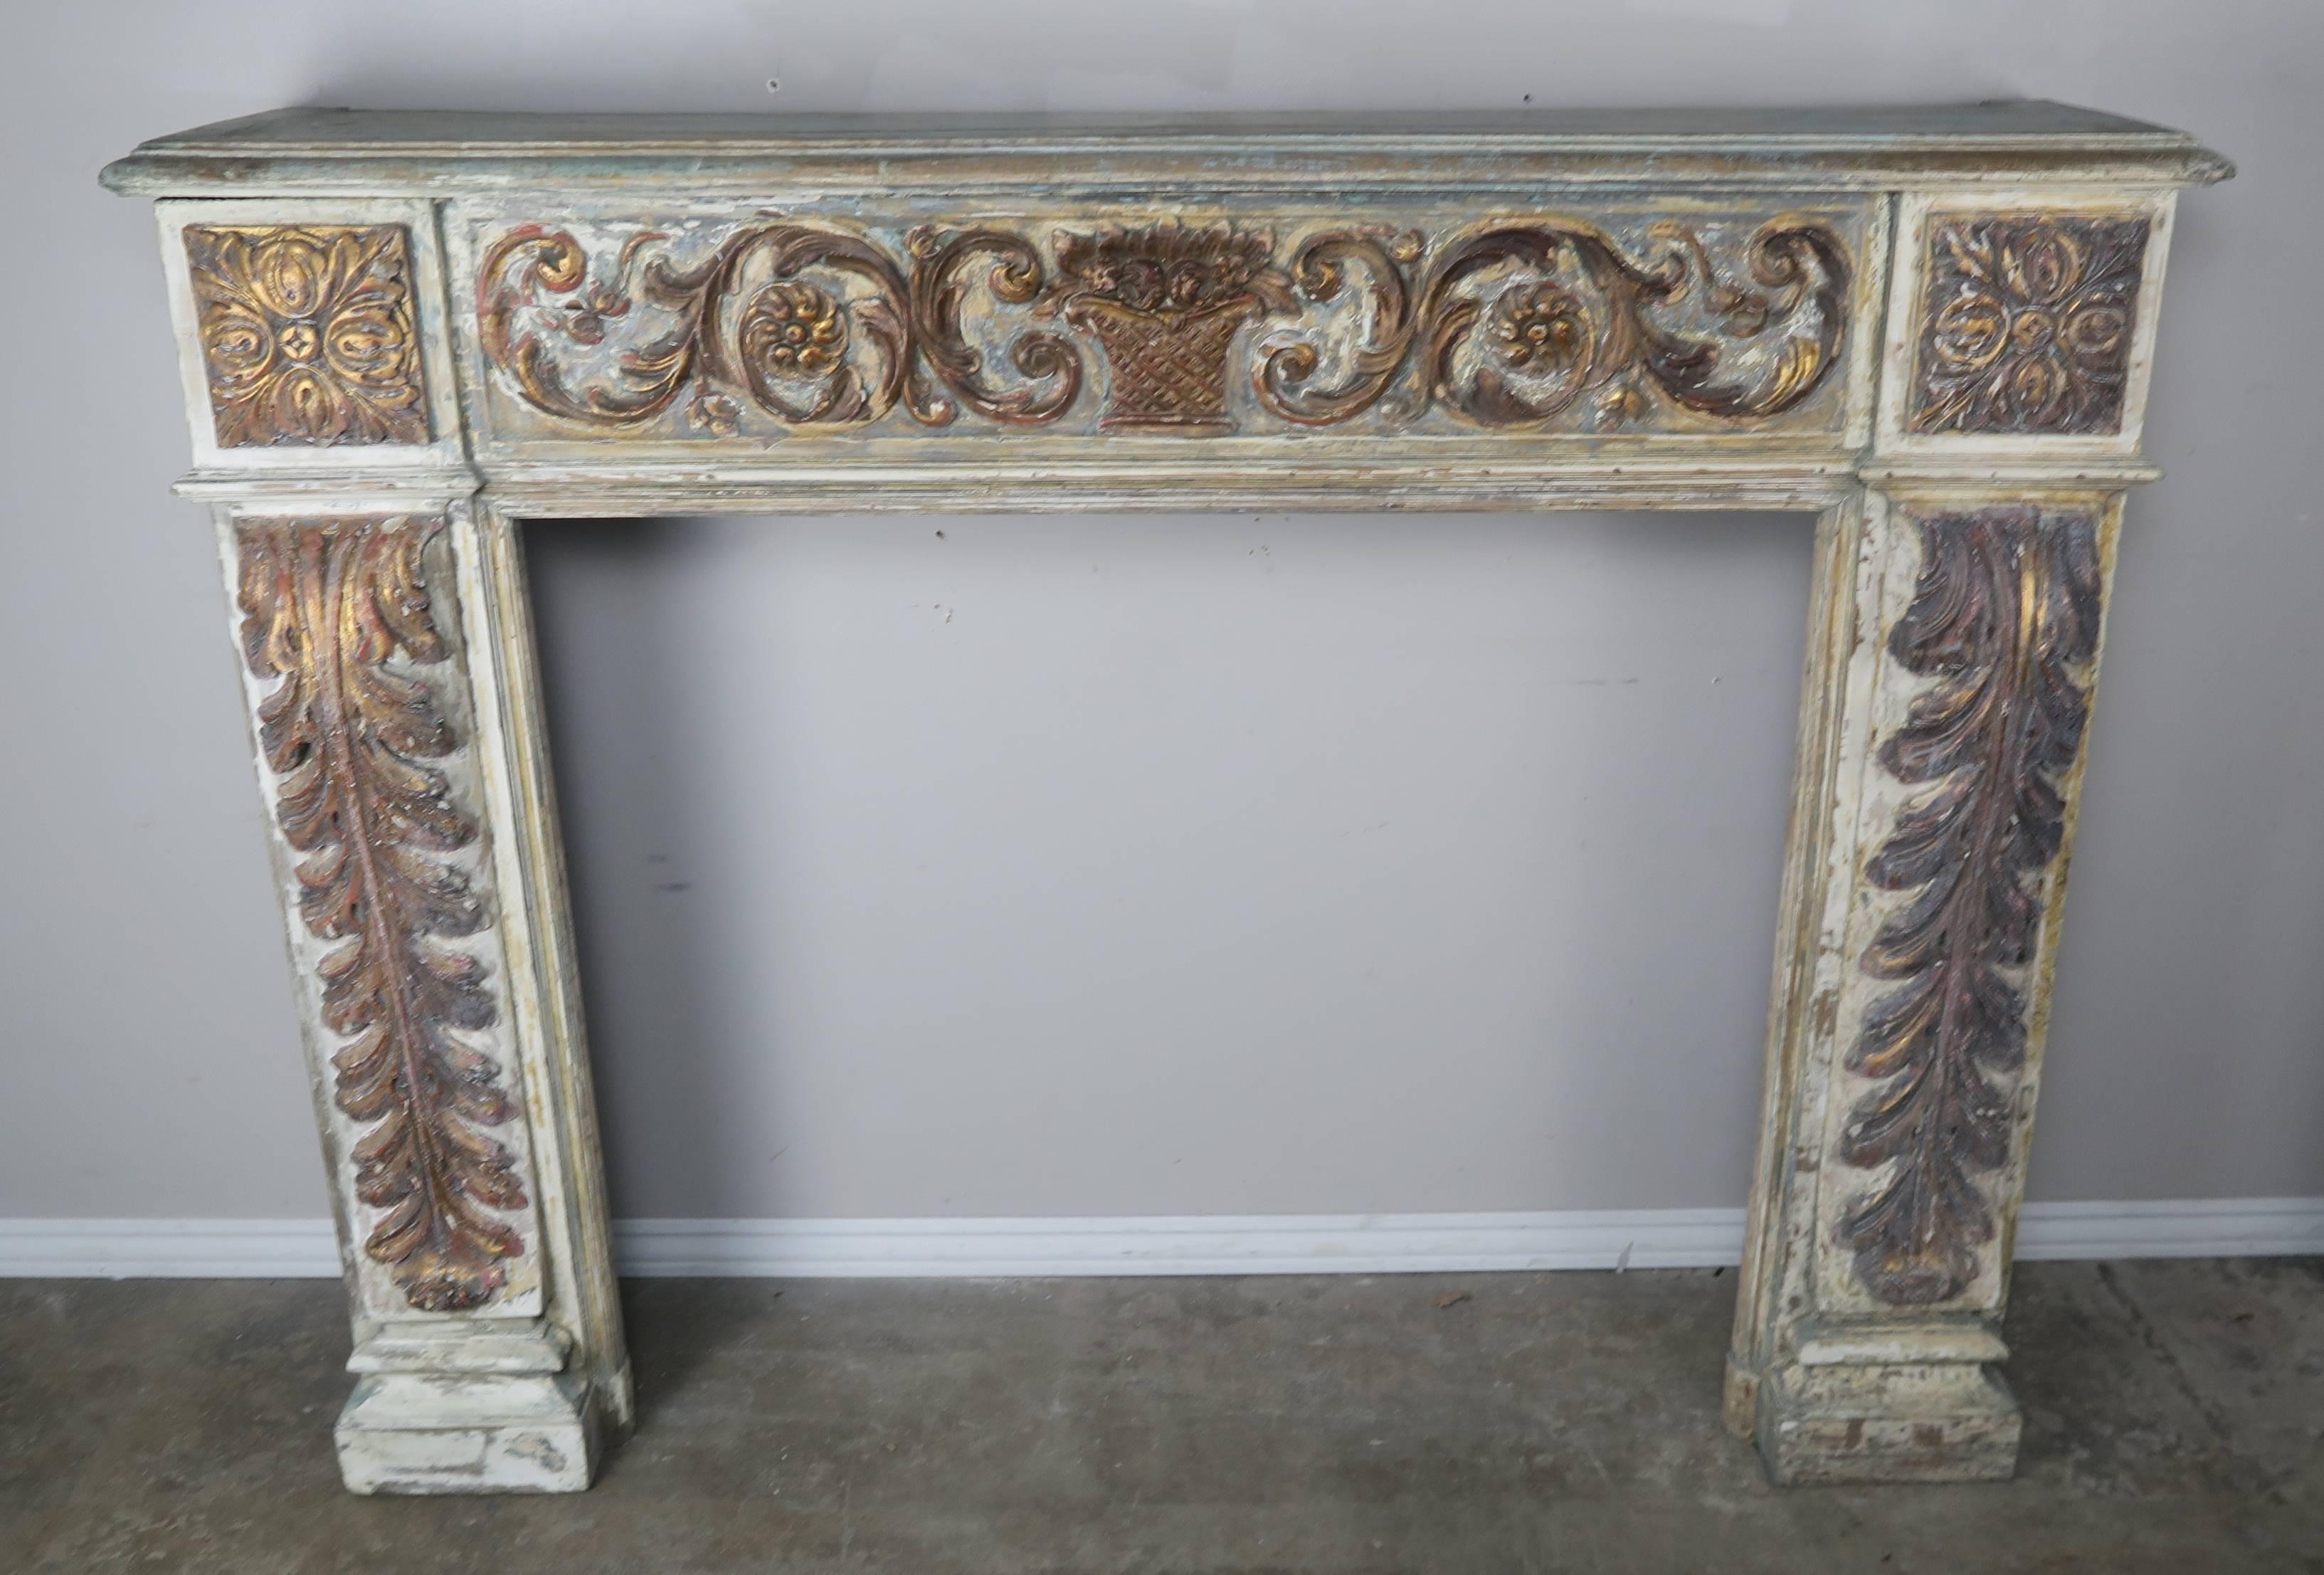 19th century Italian carved painted and parcel-gilt fireplace mantel. Detailed with a centre urn with swirling flowers and acanthus leaves throughout.
  